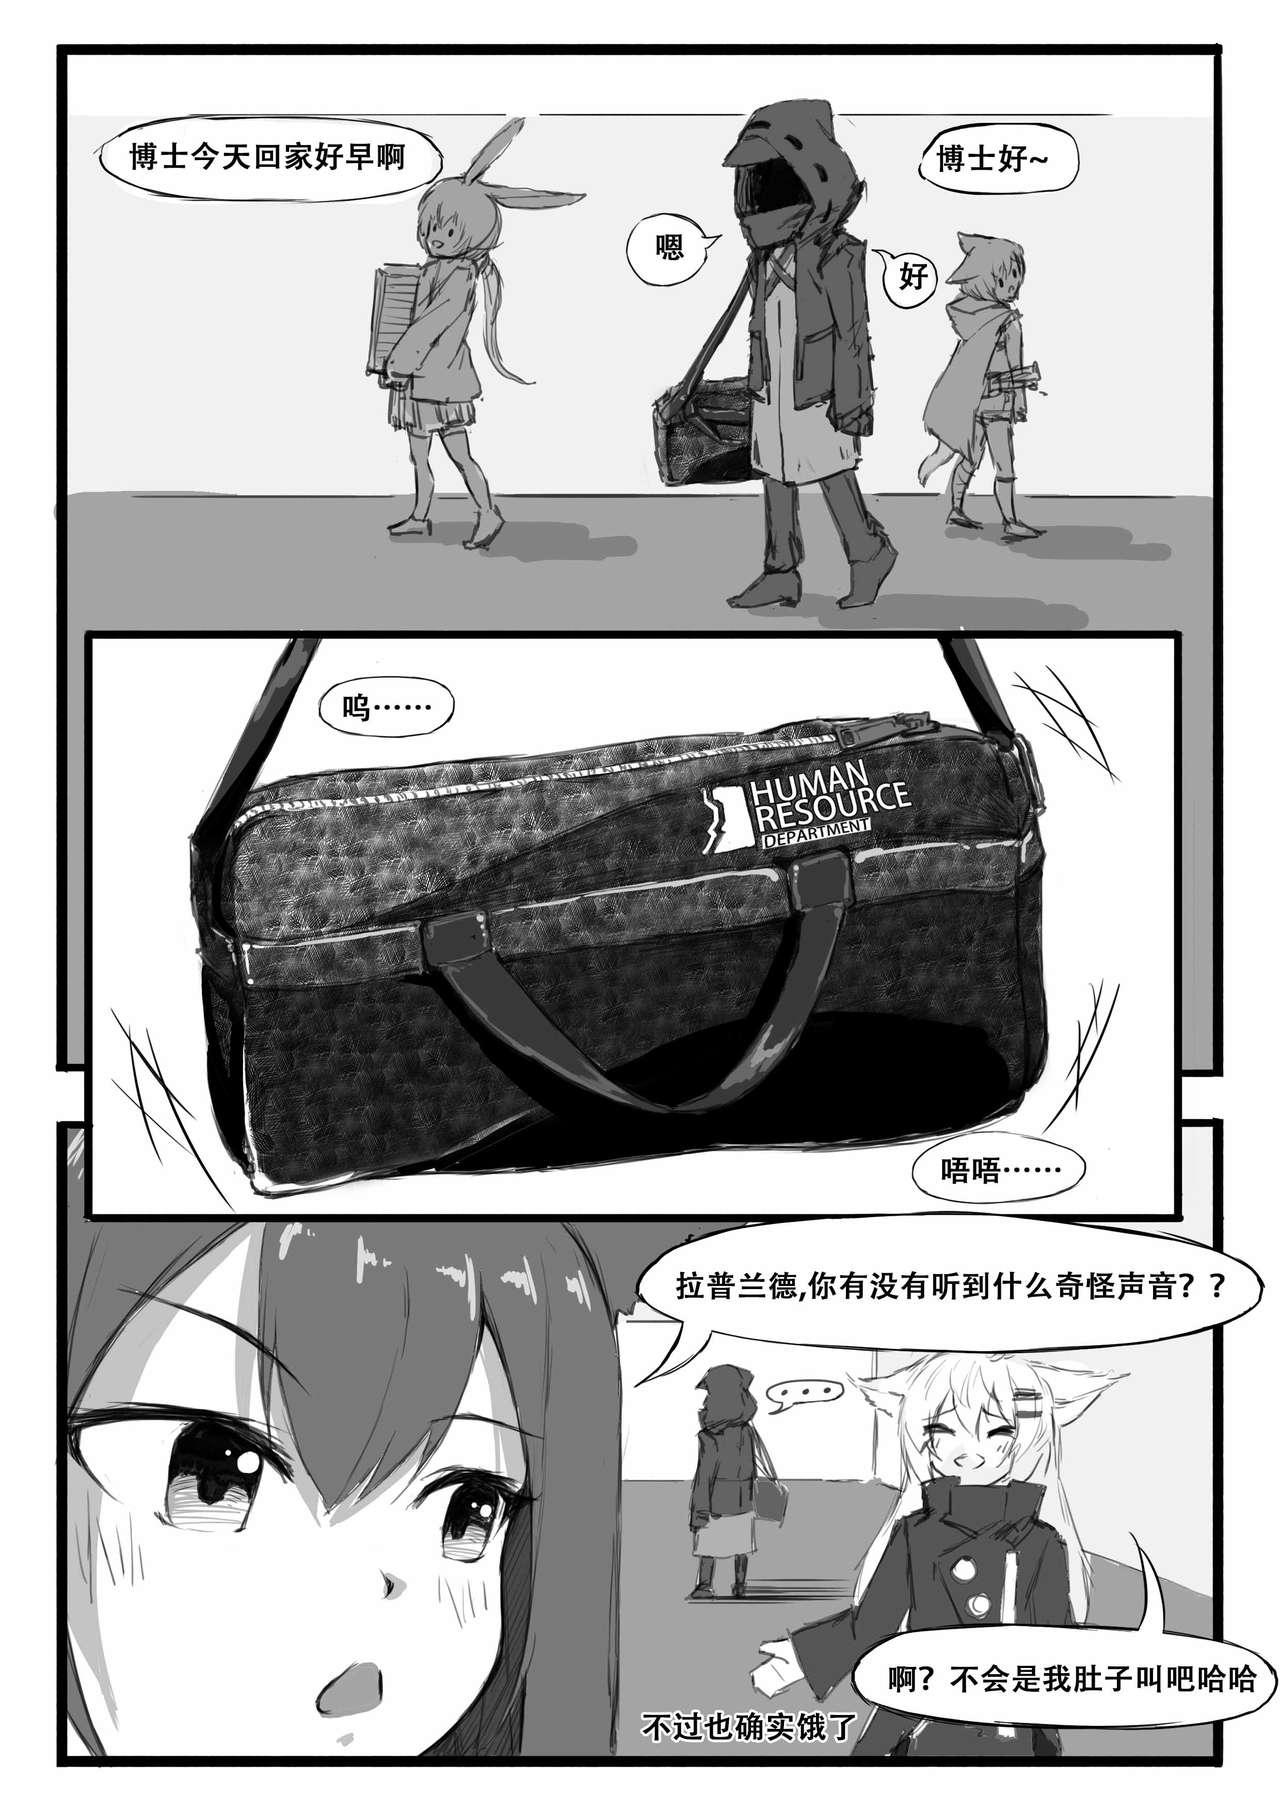 Step 铃兰的单人任务 - Arknights Wives - Page 10